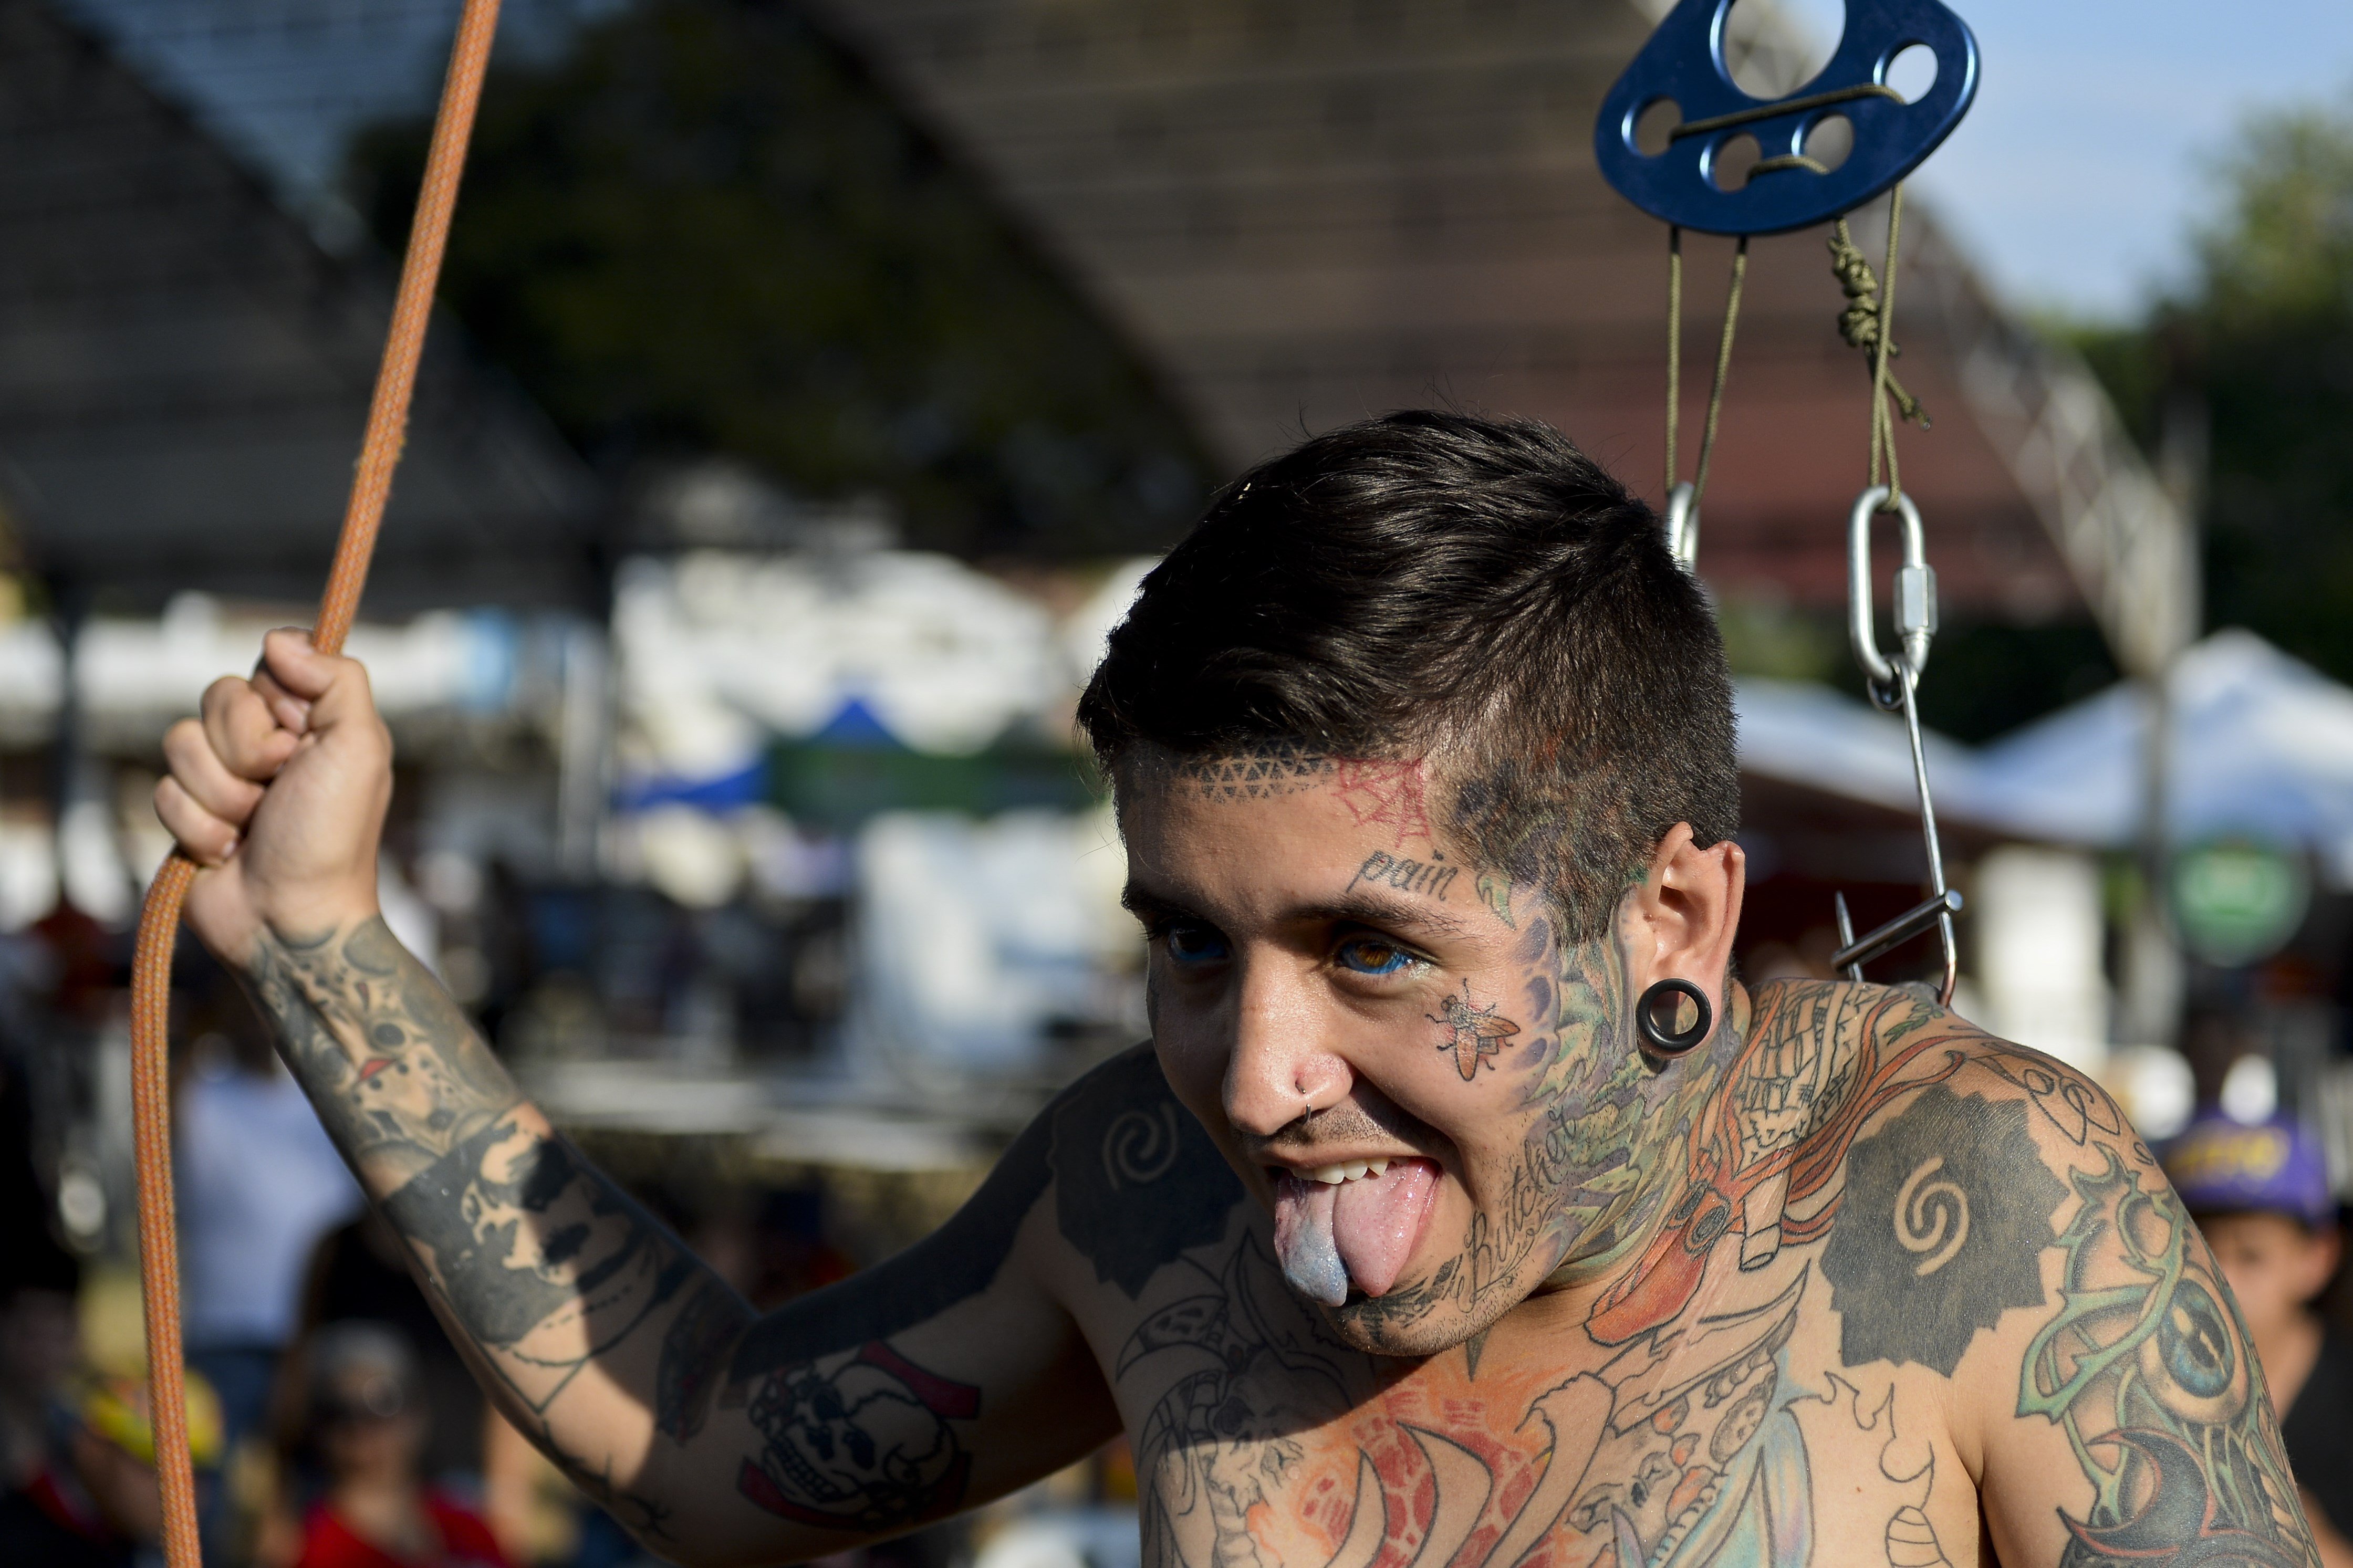 Hang Out With Extreme Body Modifiers At Colombias Freakiest Tattoo  Festival  HuffPost Weird News